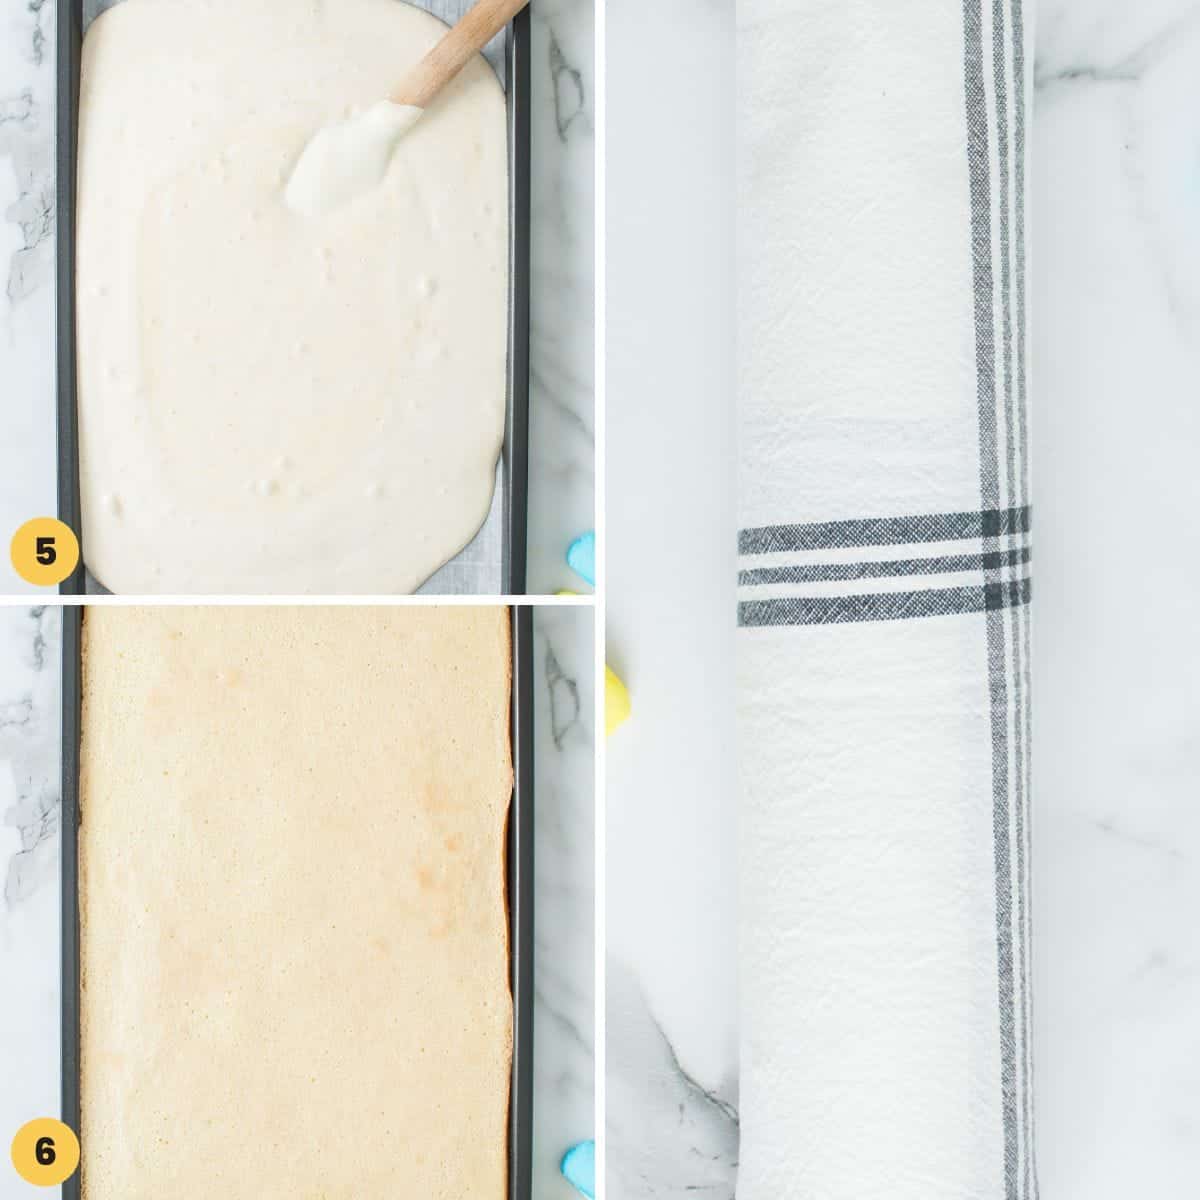 a collage of three images showing how to bake and roll up a cake made in a cookie sheet.